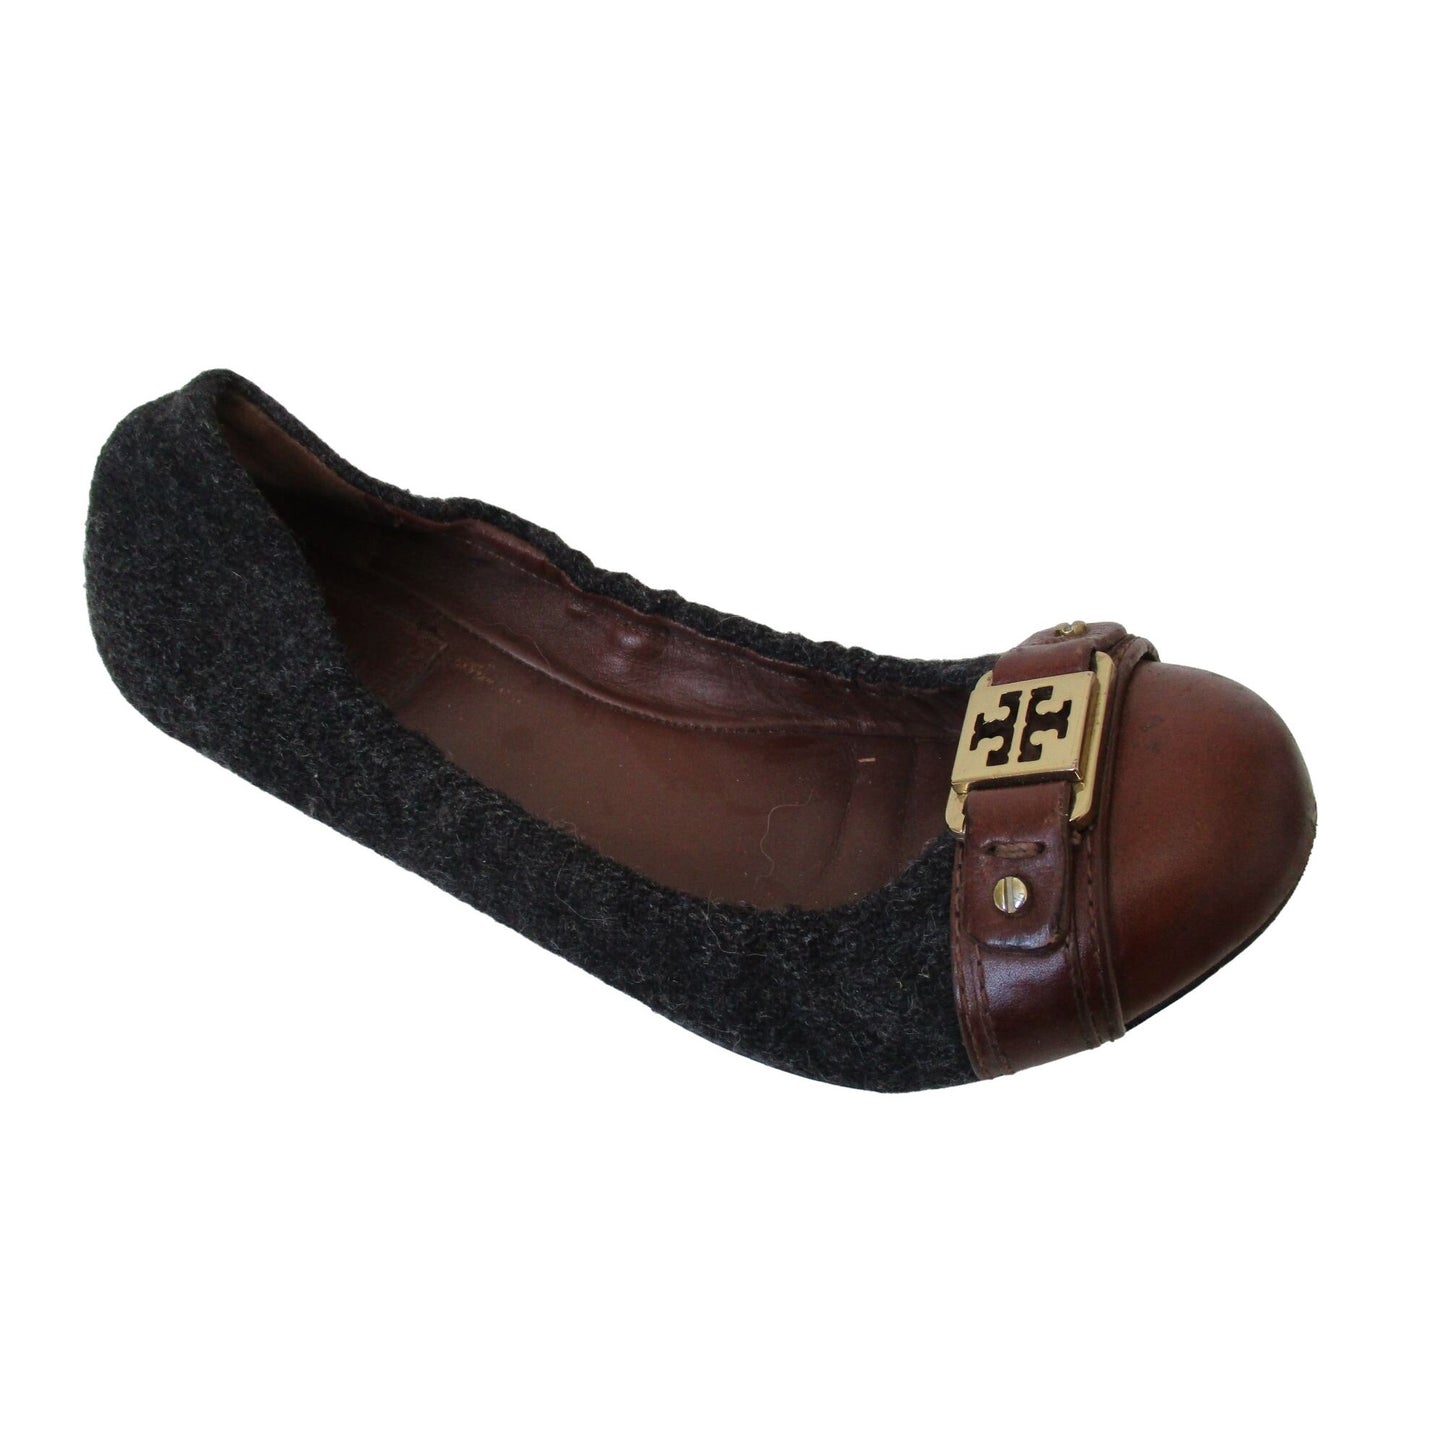 Tory Burch color block brown leather & grey wool size 8 rounded toe flats